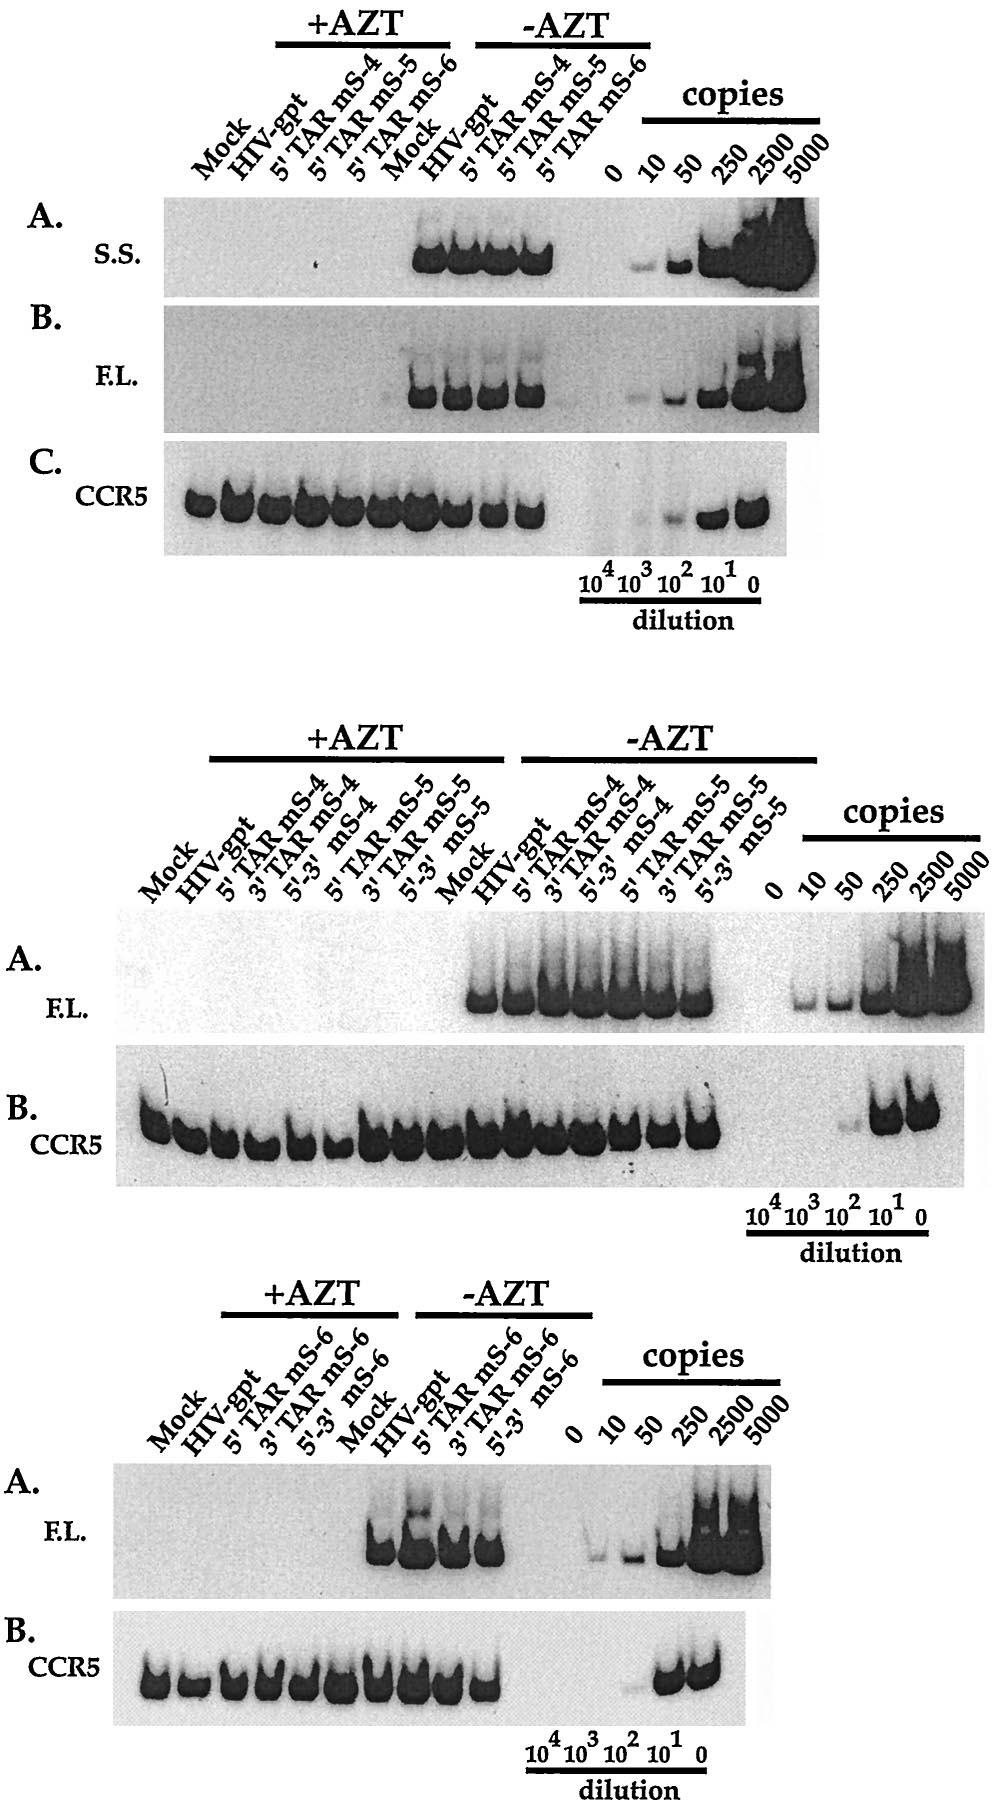 VOL. 74, 2000 REVERSE TRANSCRIPTION IN HIV-1 R SEQUENCES 8331 with the idea that the strong-stop DNAs are being degraded in host cells as a result of certain mismatches between the sssdna and 3 R